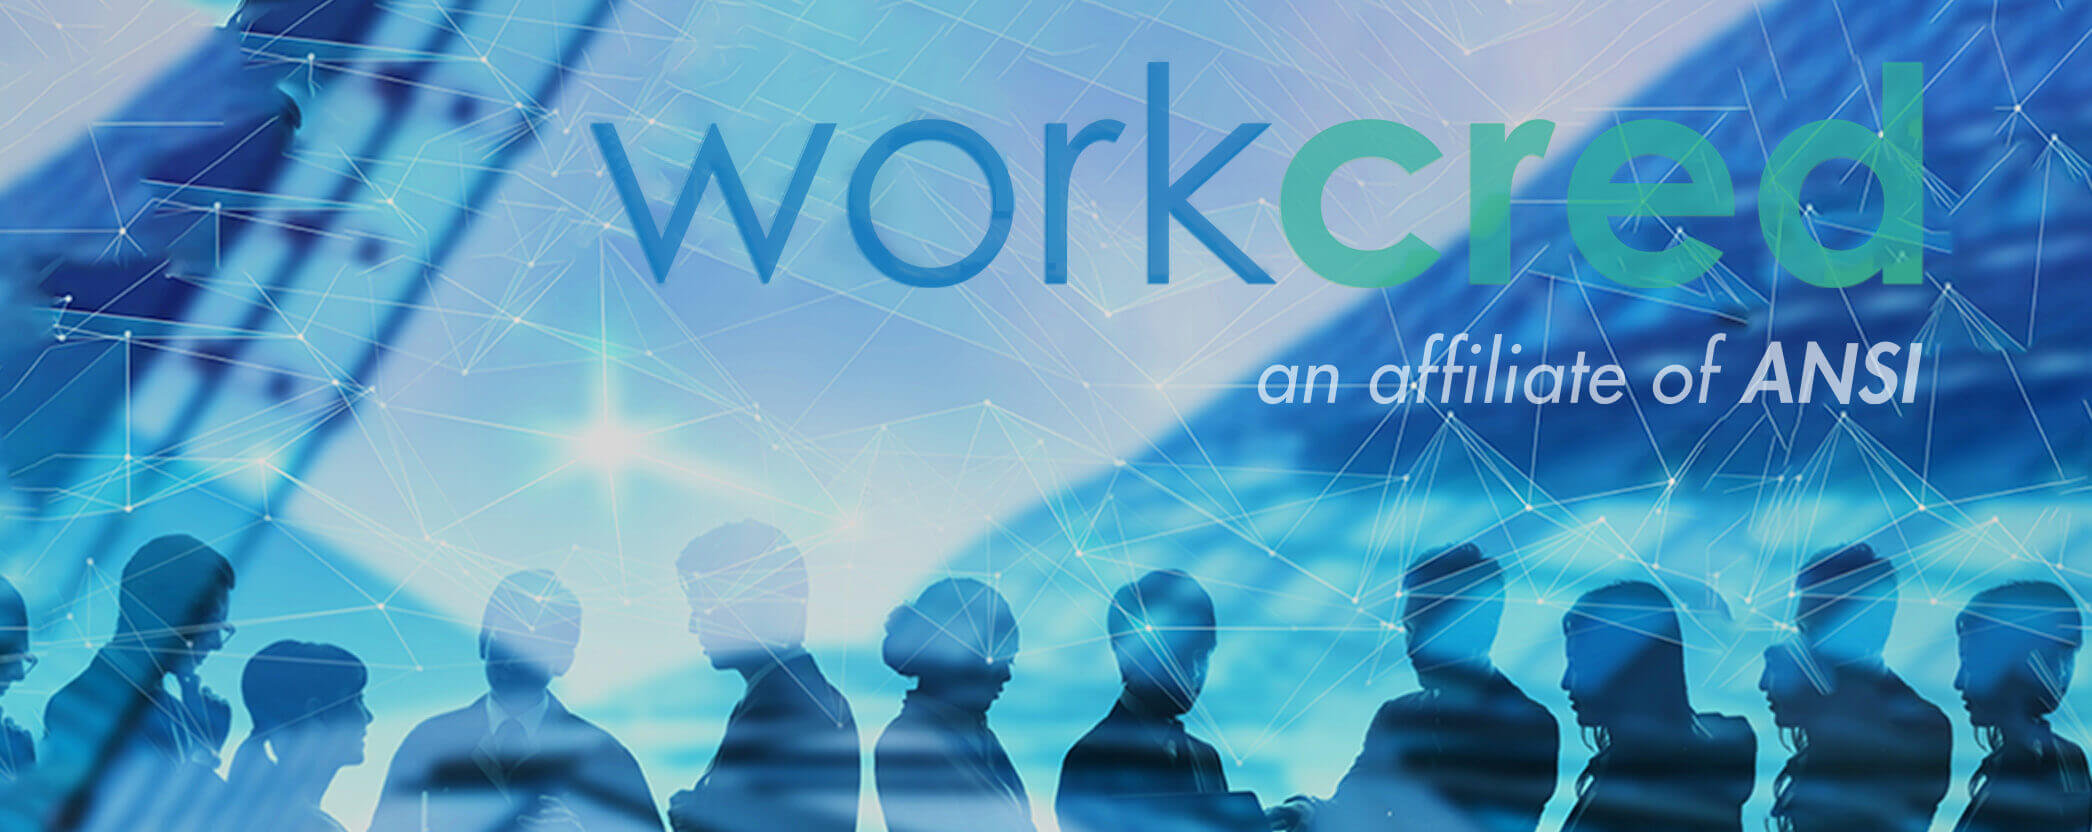 Abstract workforce image with Workcred logo